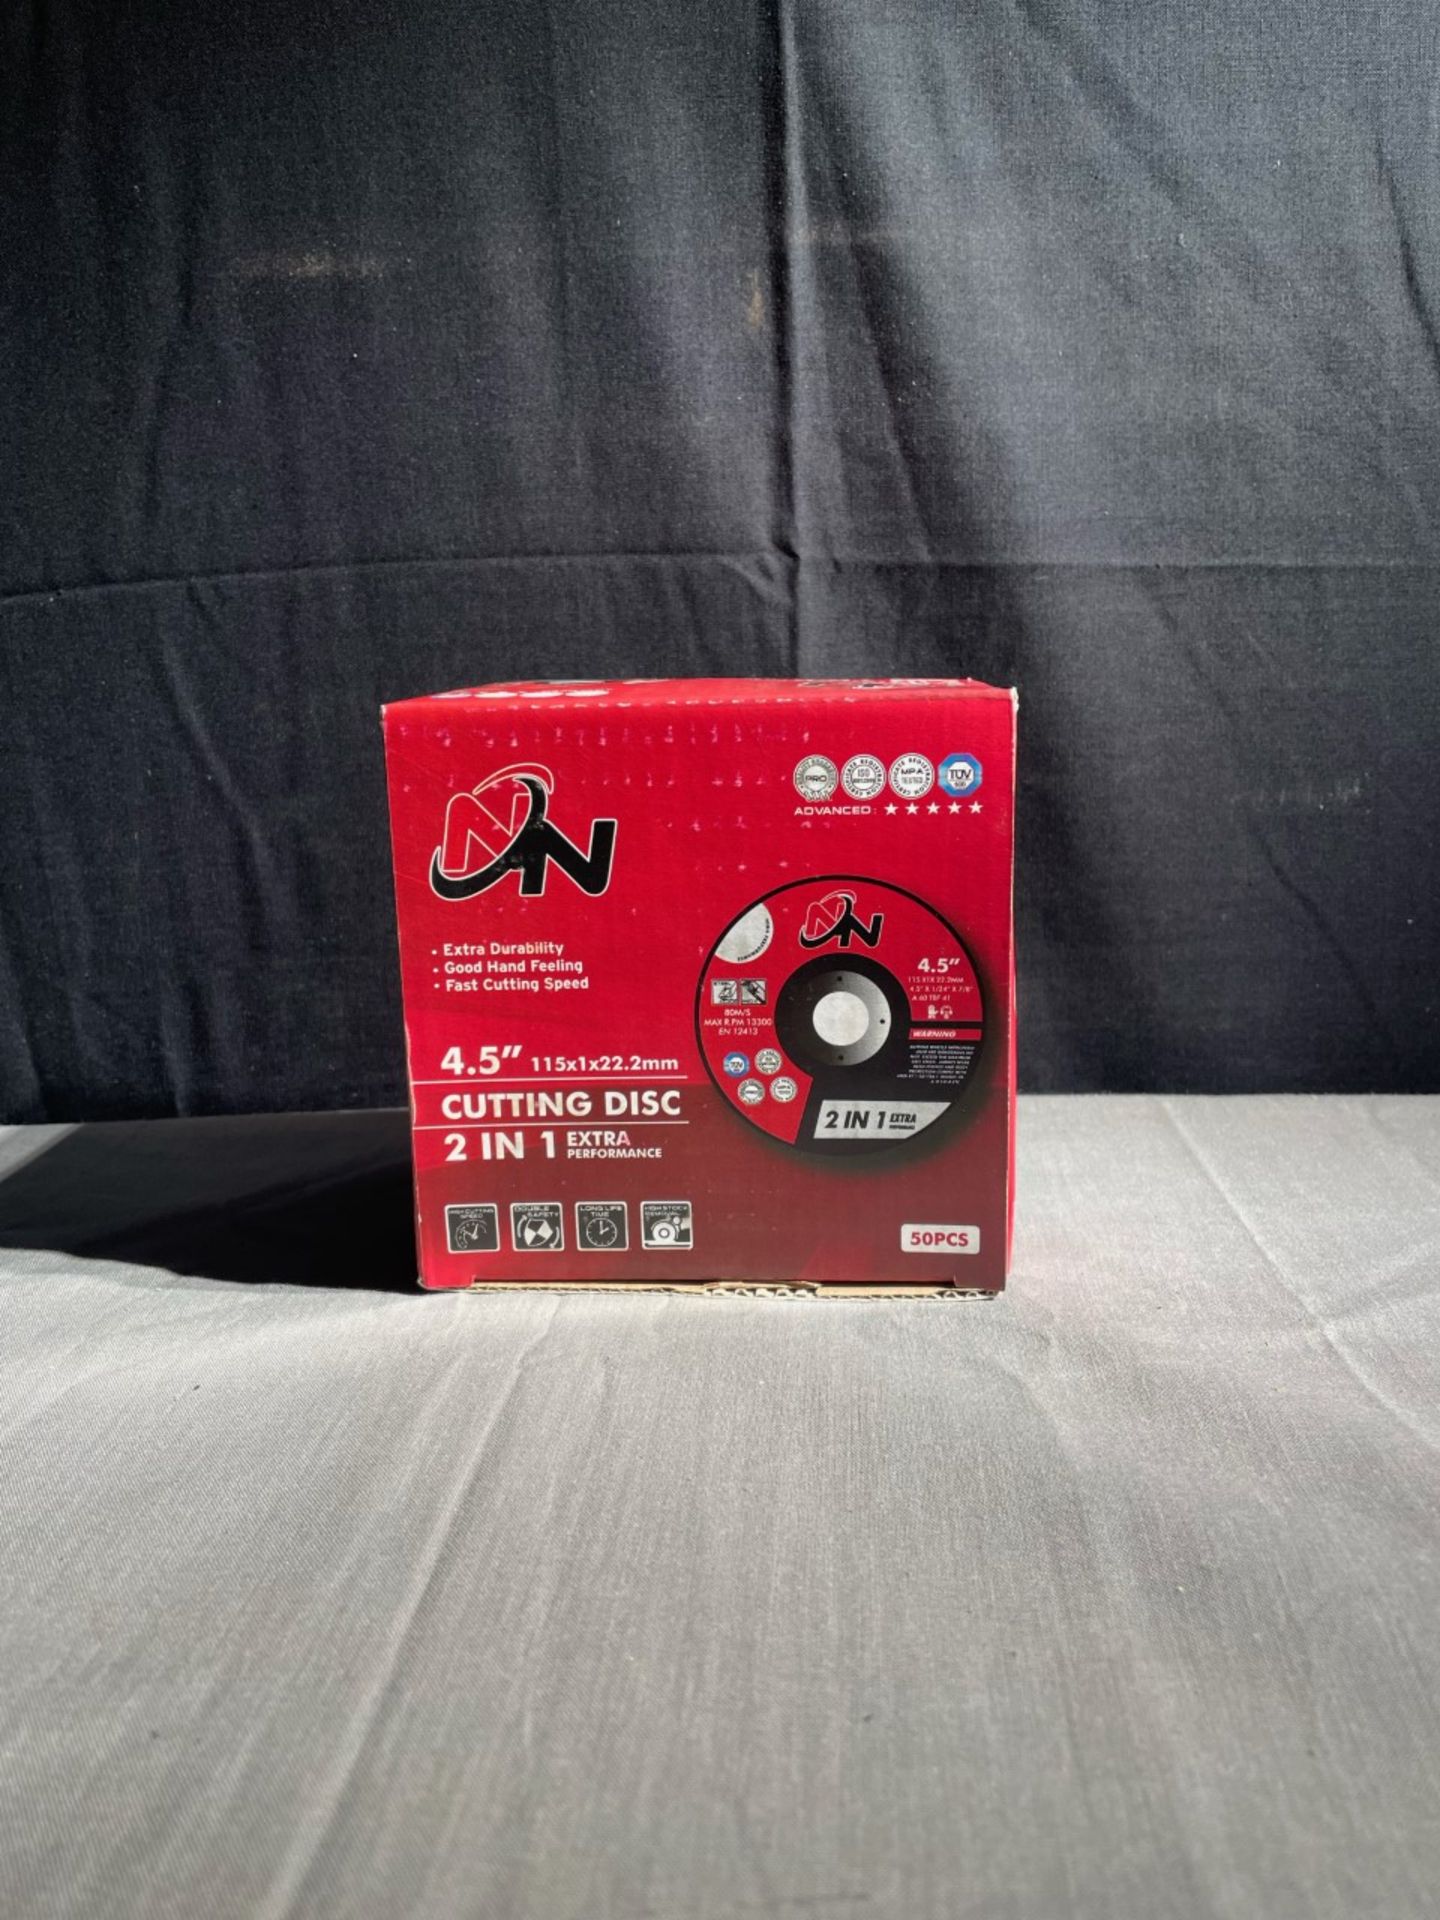 1x new box of 4.5” cutting disc for grinder. 50 unit in box